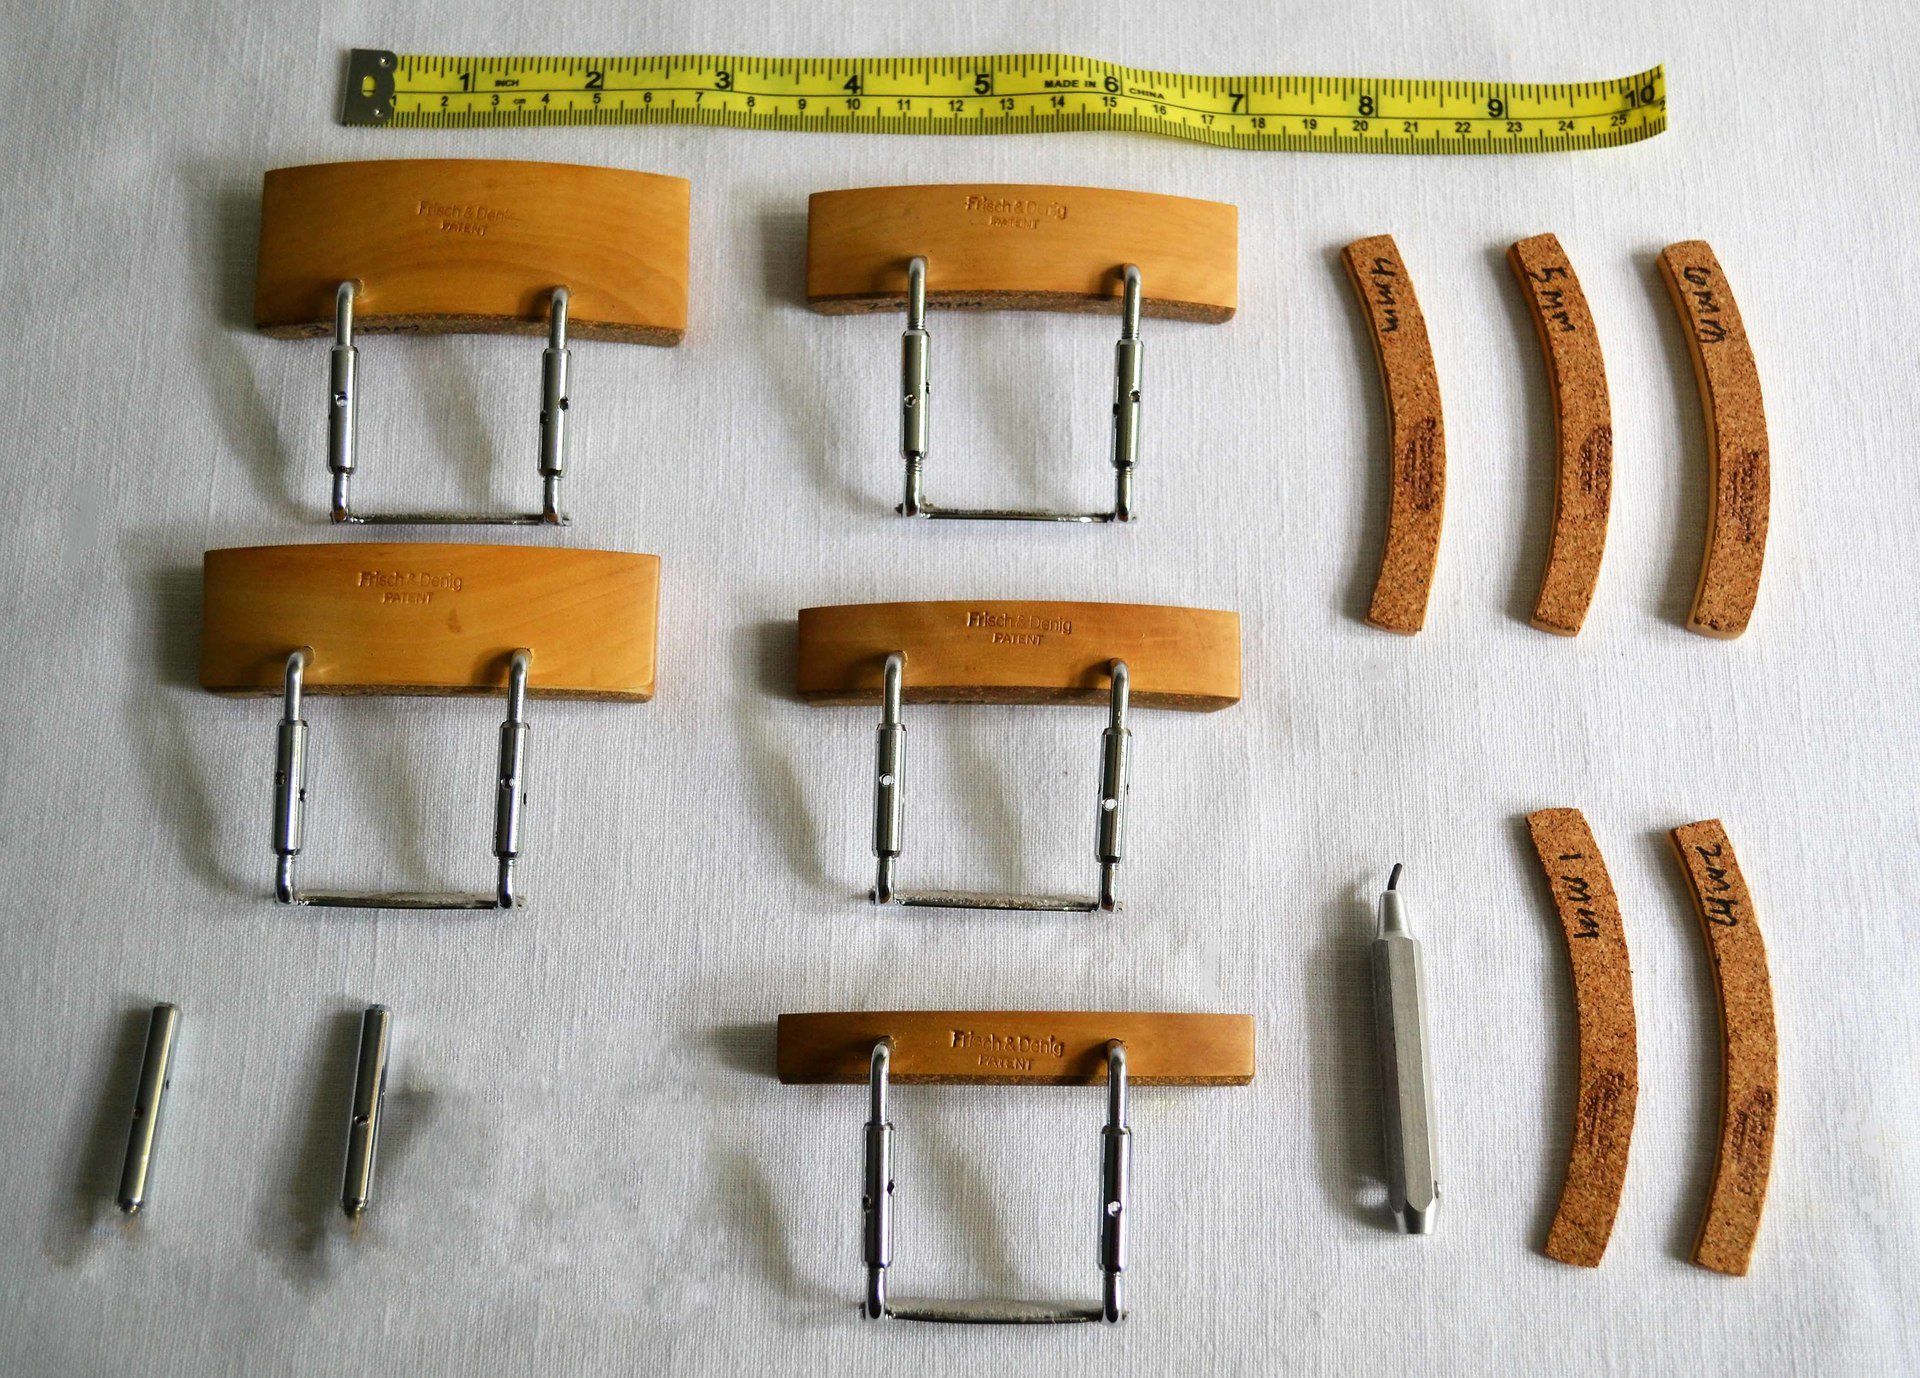 Shown: Lifts, topper,s and shims in the Fortissimo Fitting Kit